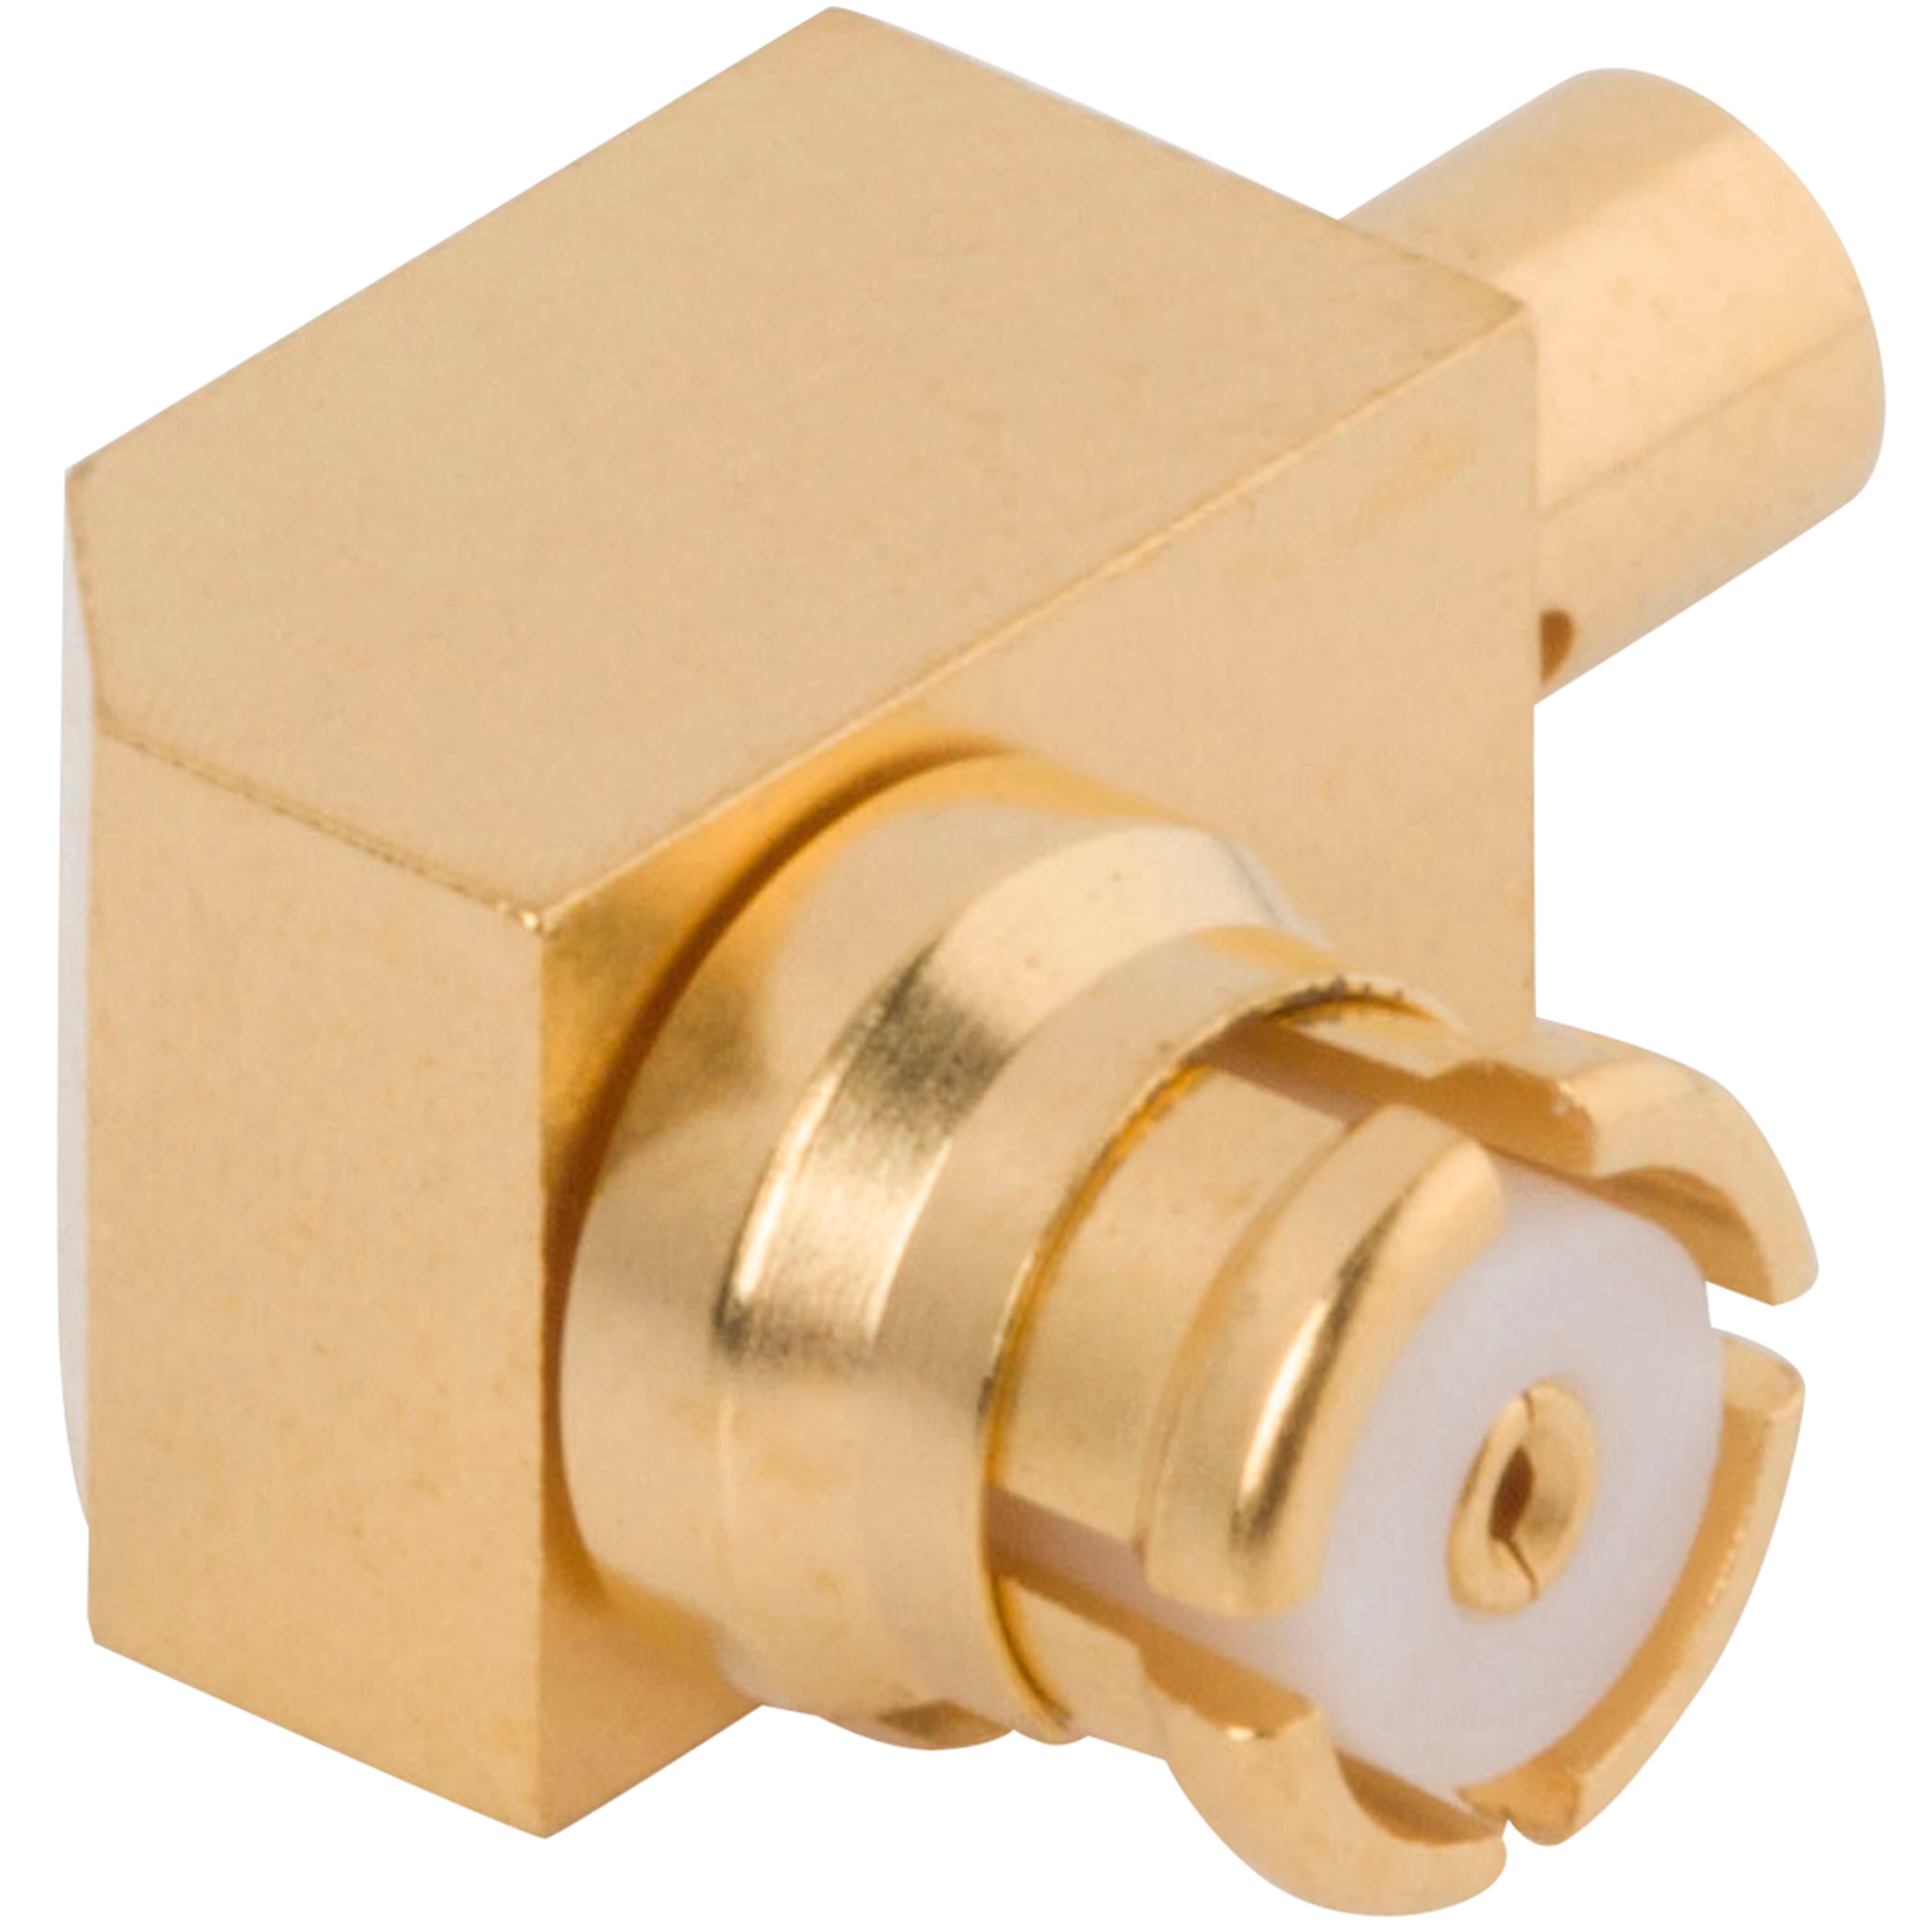 SMP Female Connector, Swept R/A for .047 Cable, 1222-4004